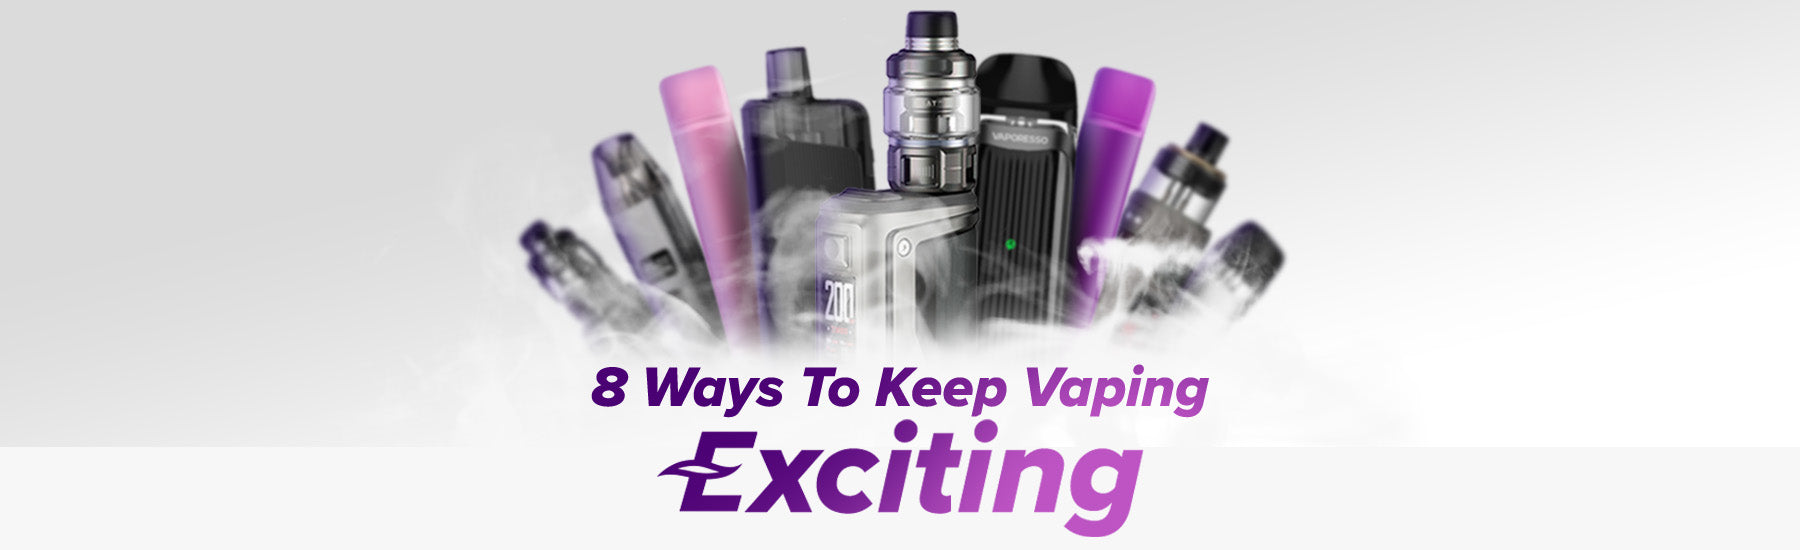 Make your vaping exciting